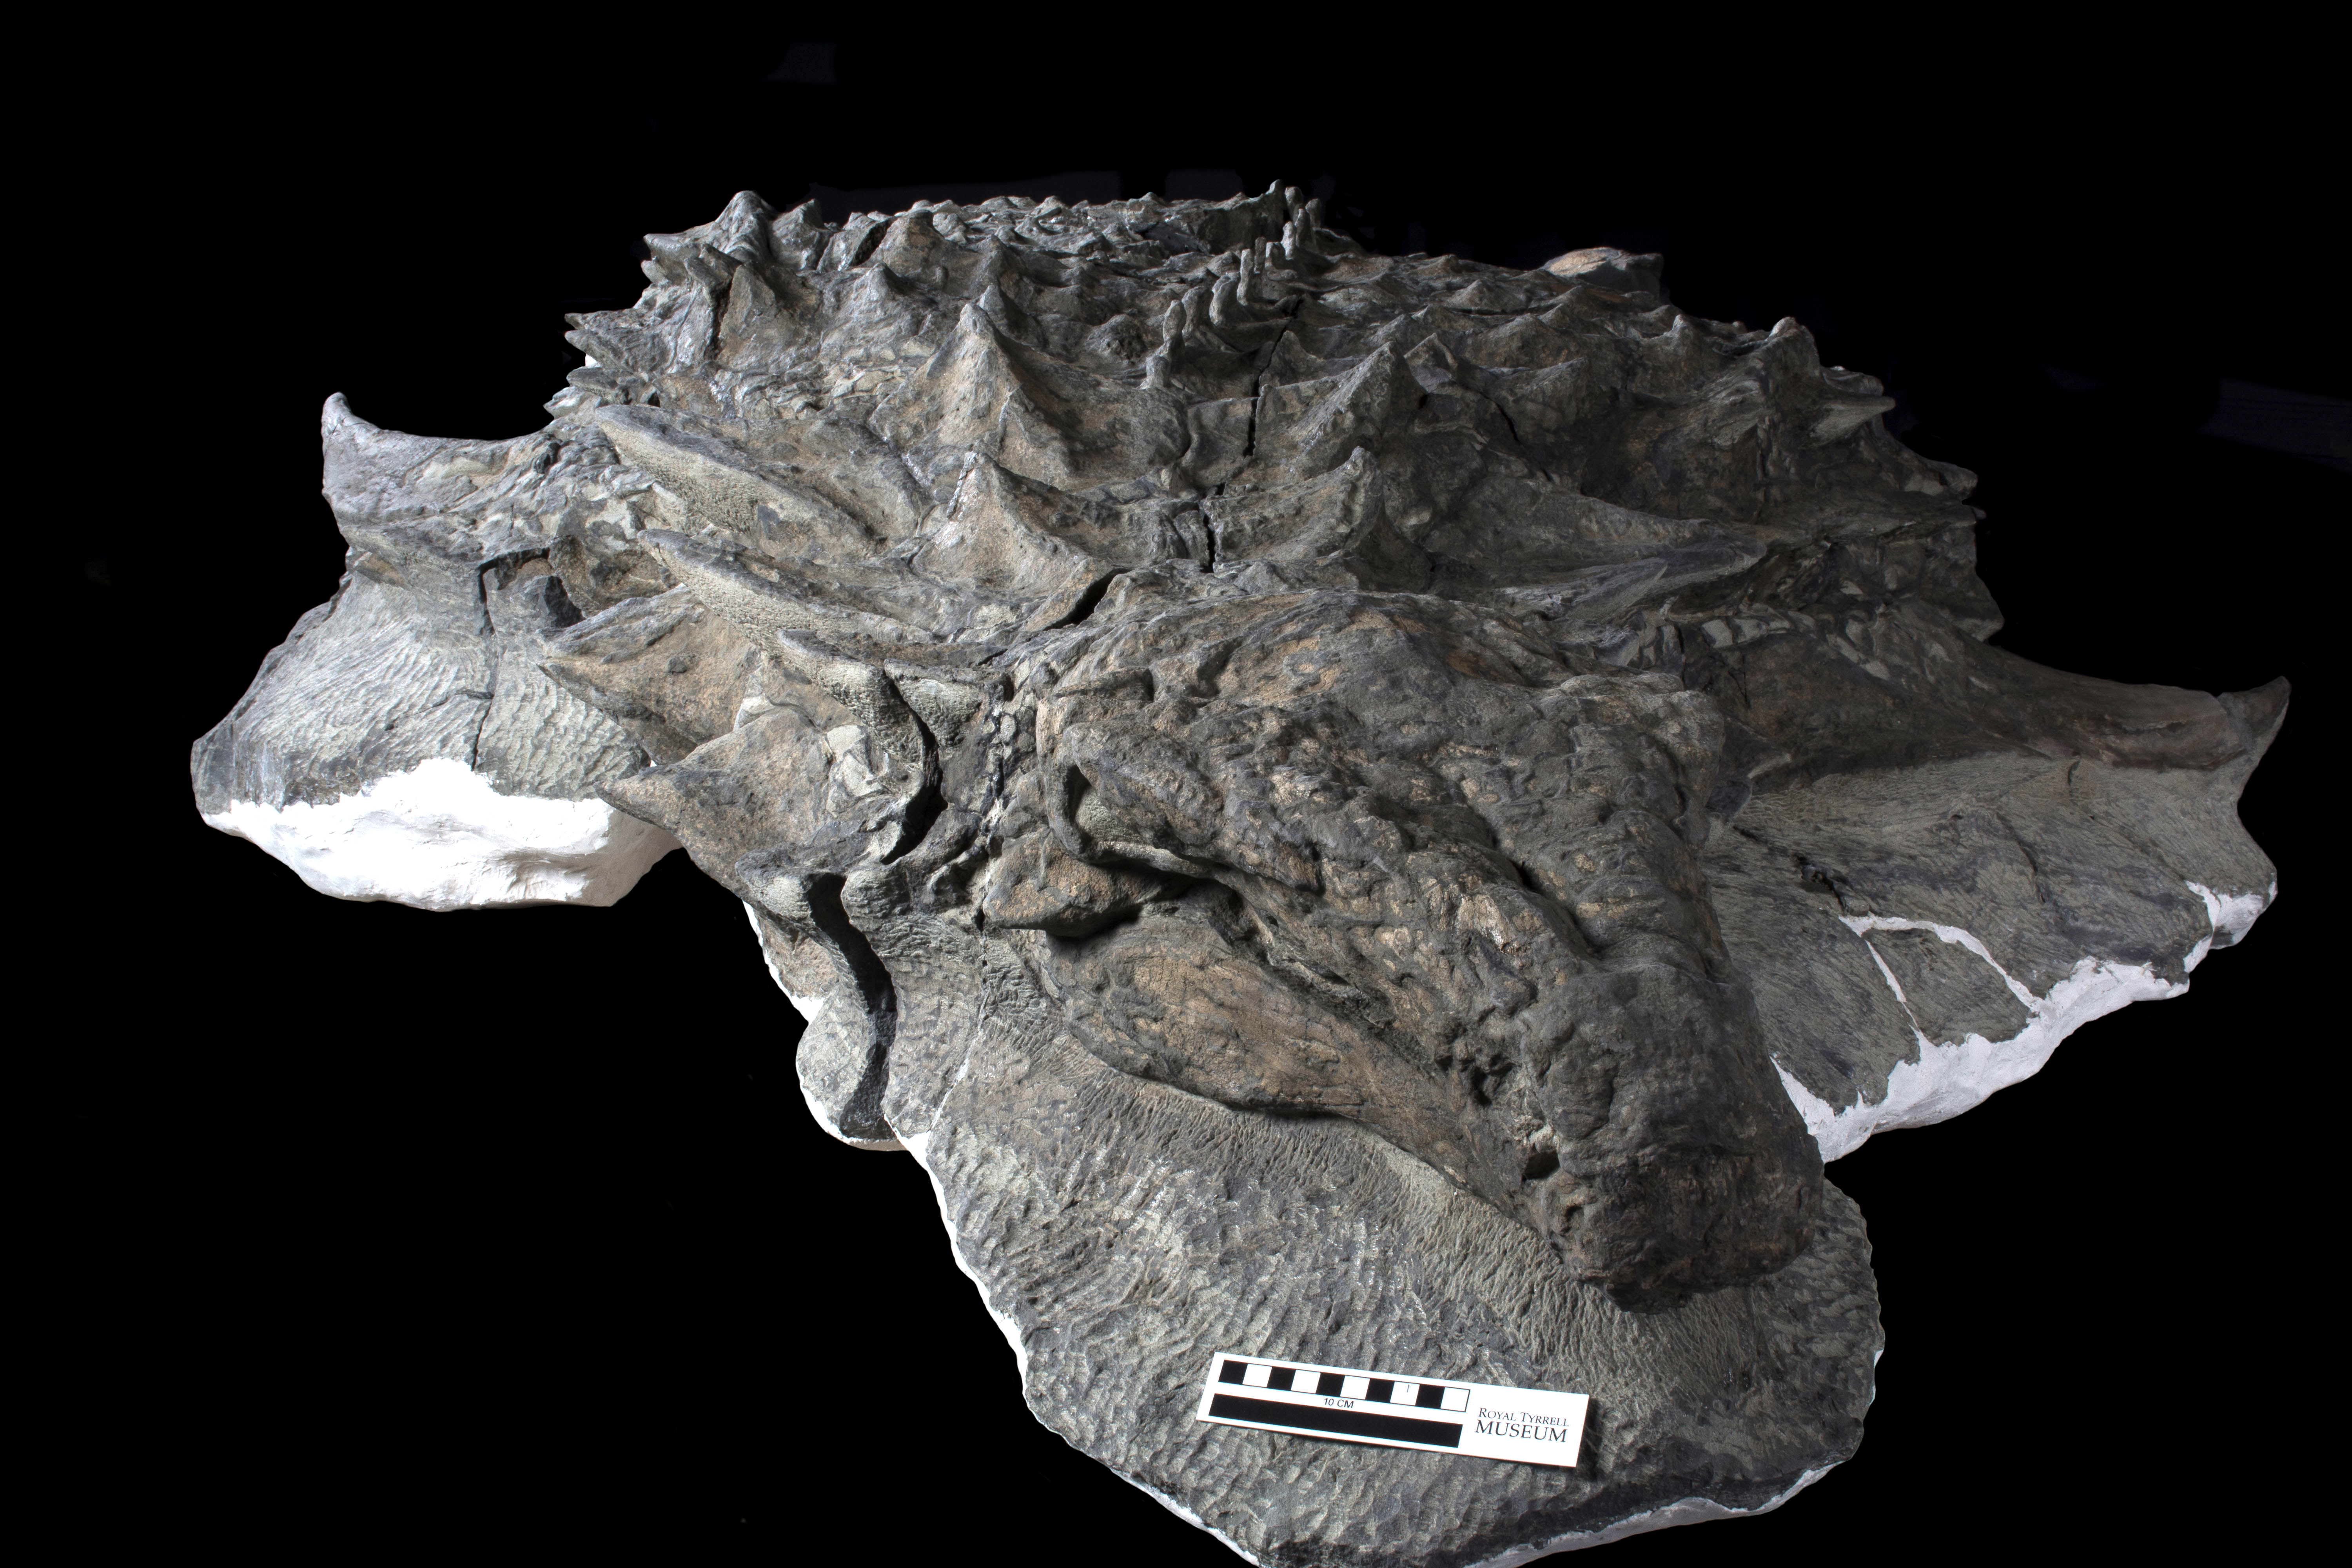 Researchers look a dinosaur in its remarkably preserved face | Ars Technica